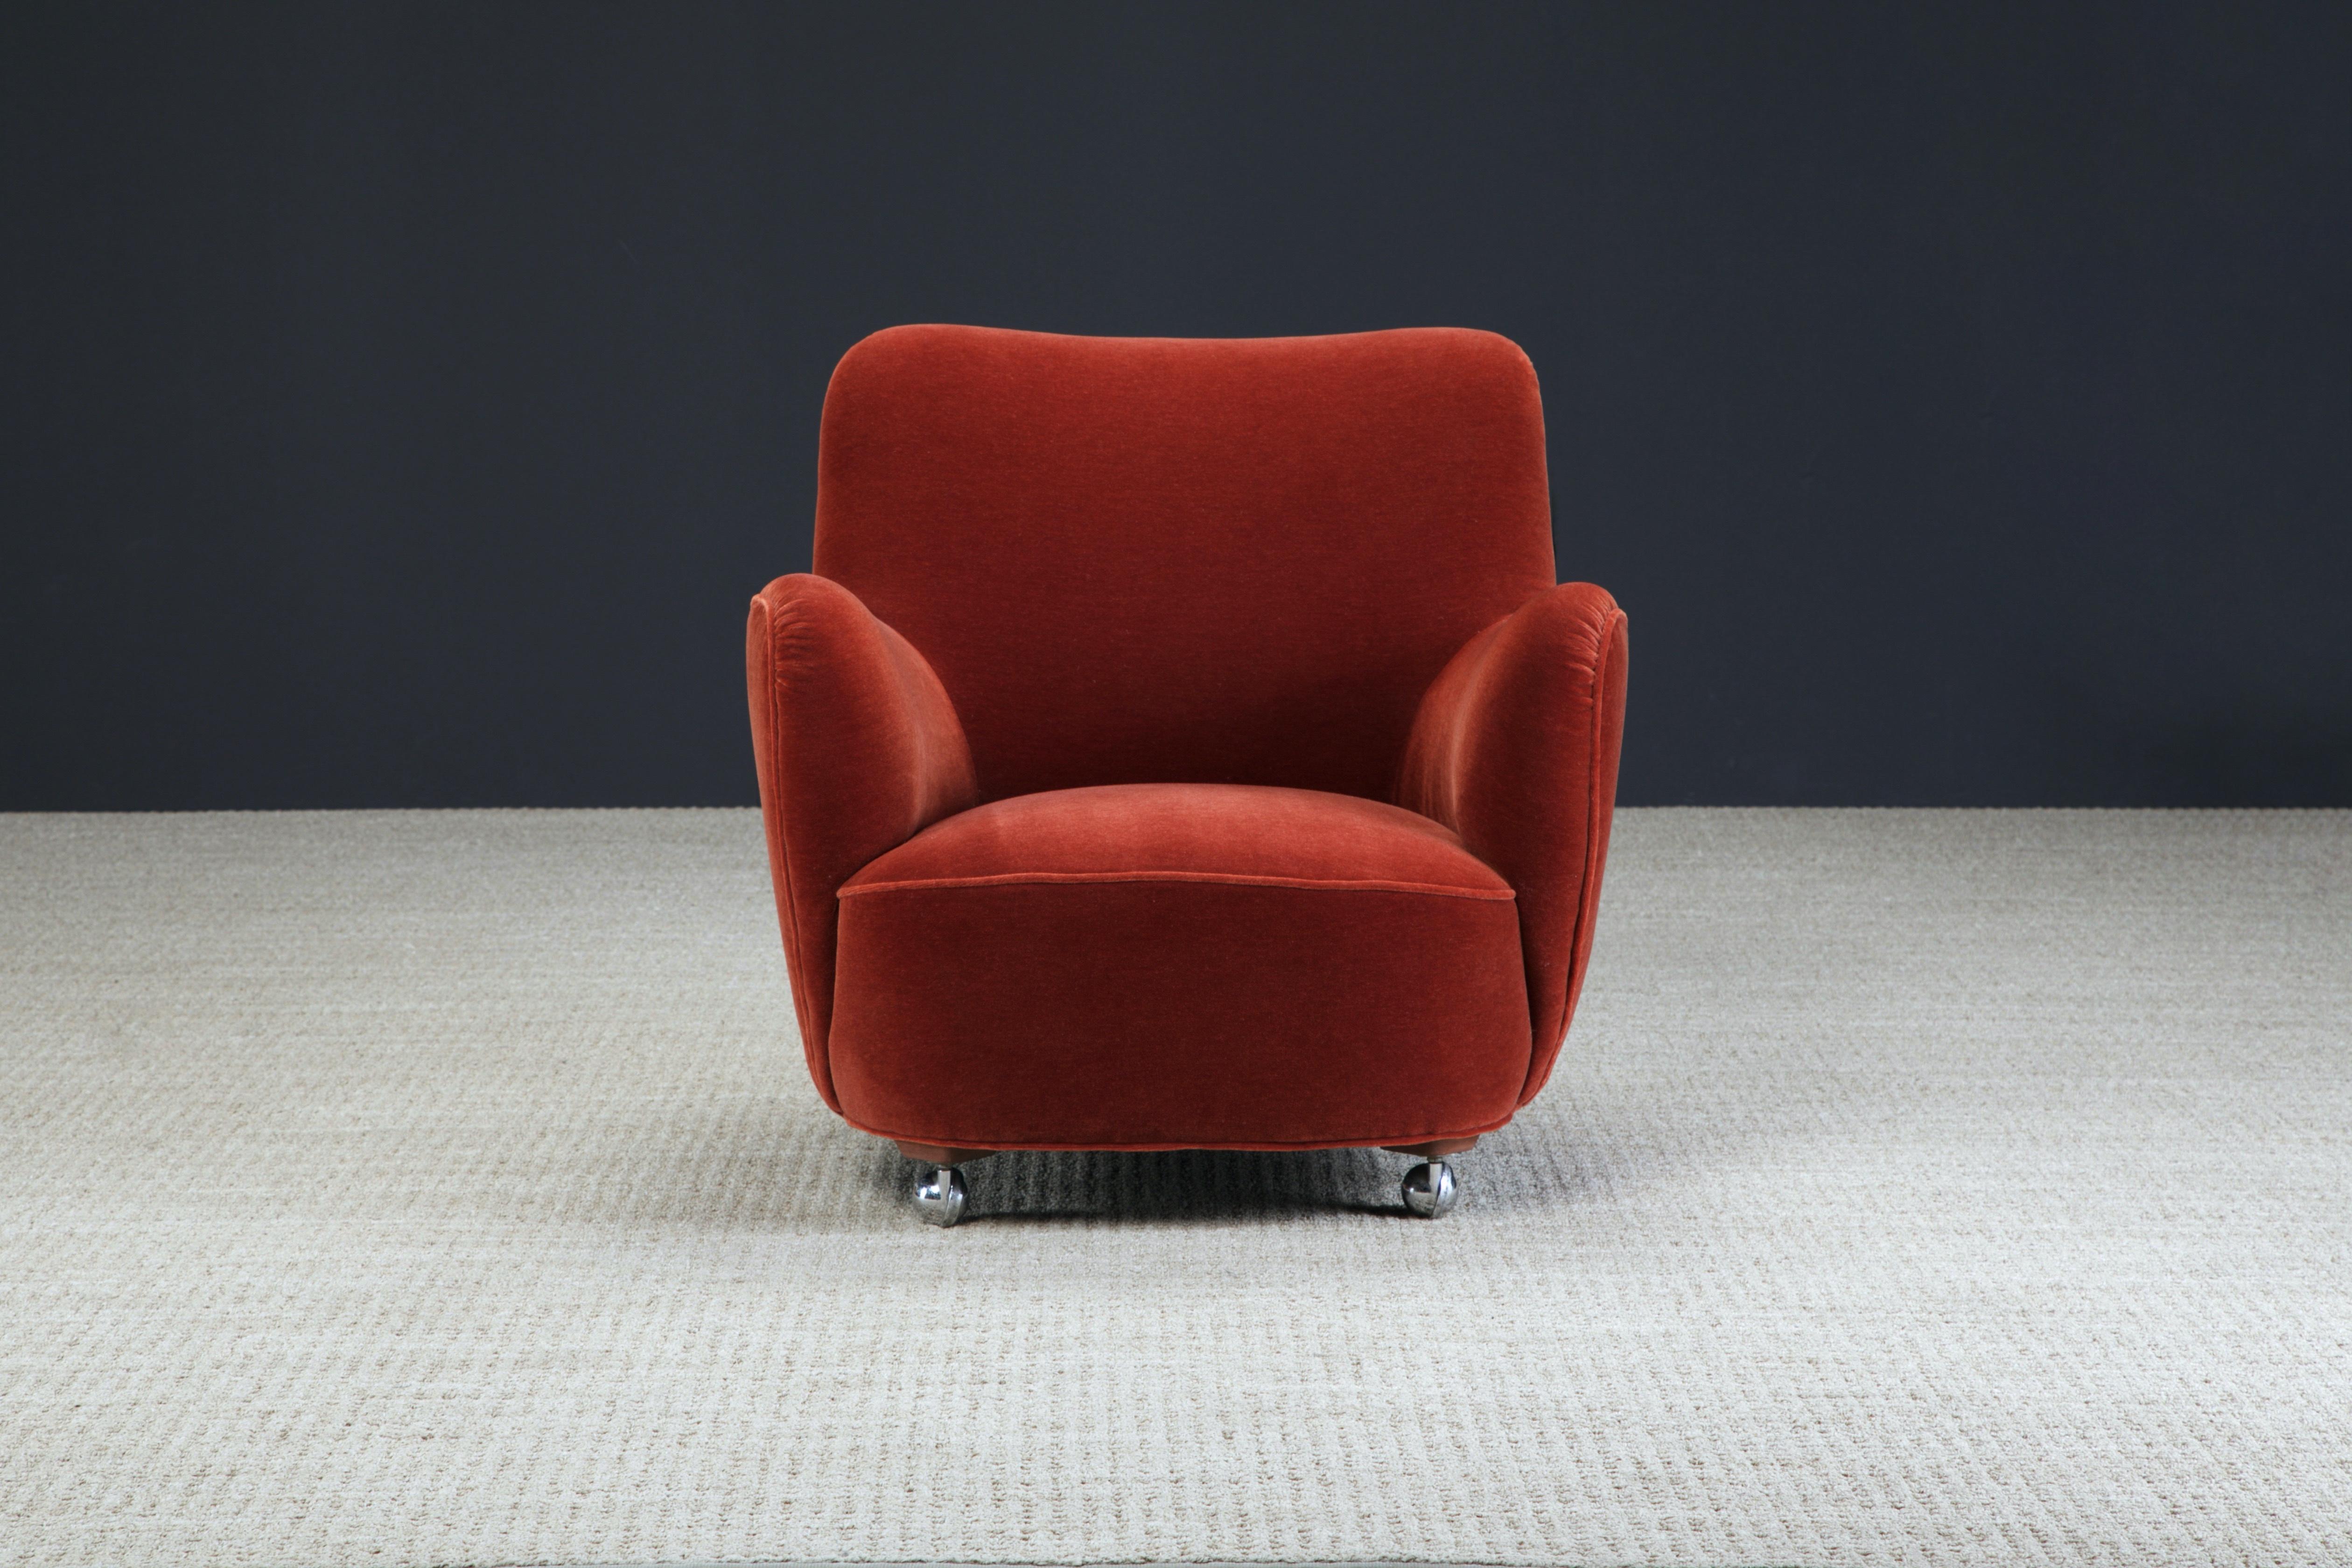 This rare collectors piece is the Vladimir Kagan model #100-A 'Barrel Lounge Chair' on ball casters, designed in 1947, signed with Vladimir Kagan Designs label.

The gorgeous velvet is in a red color but with a hint of burnt orange tone giving it